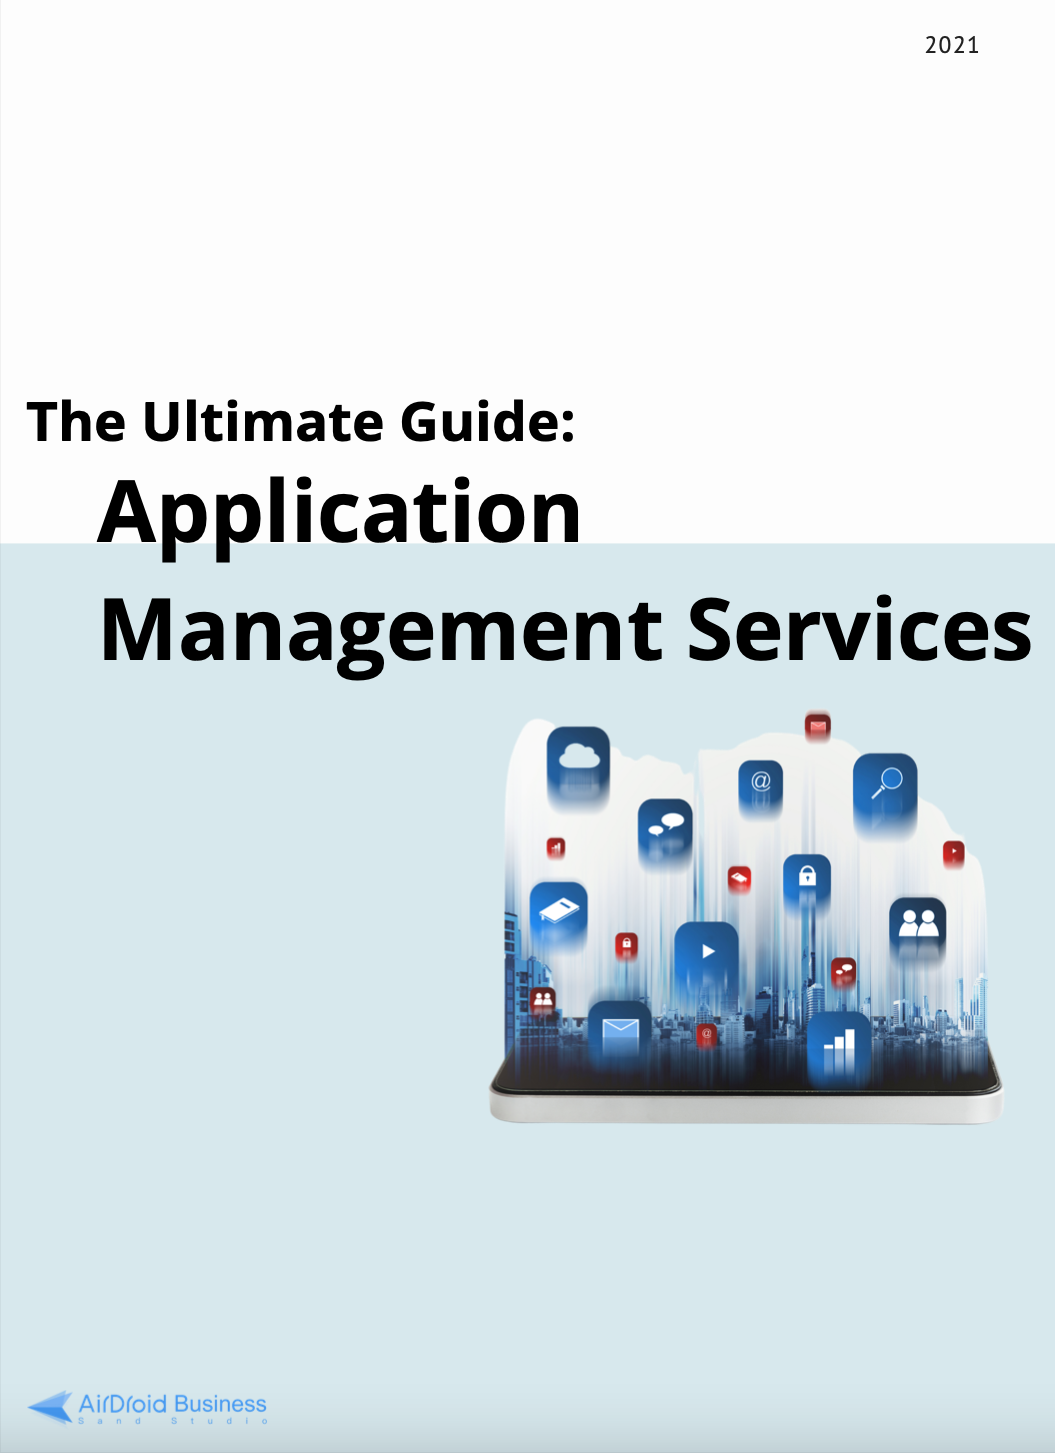 The Ultimate Guide to application management services